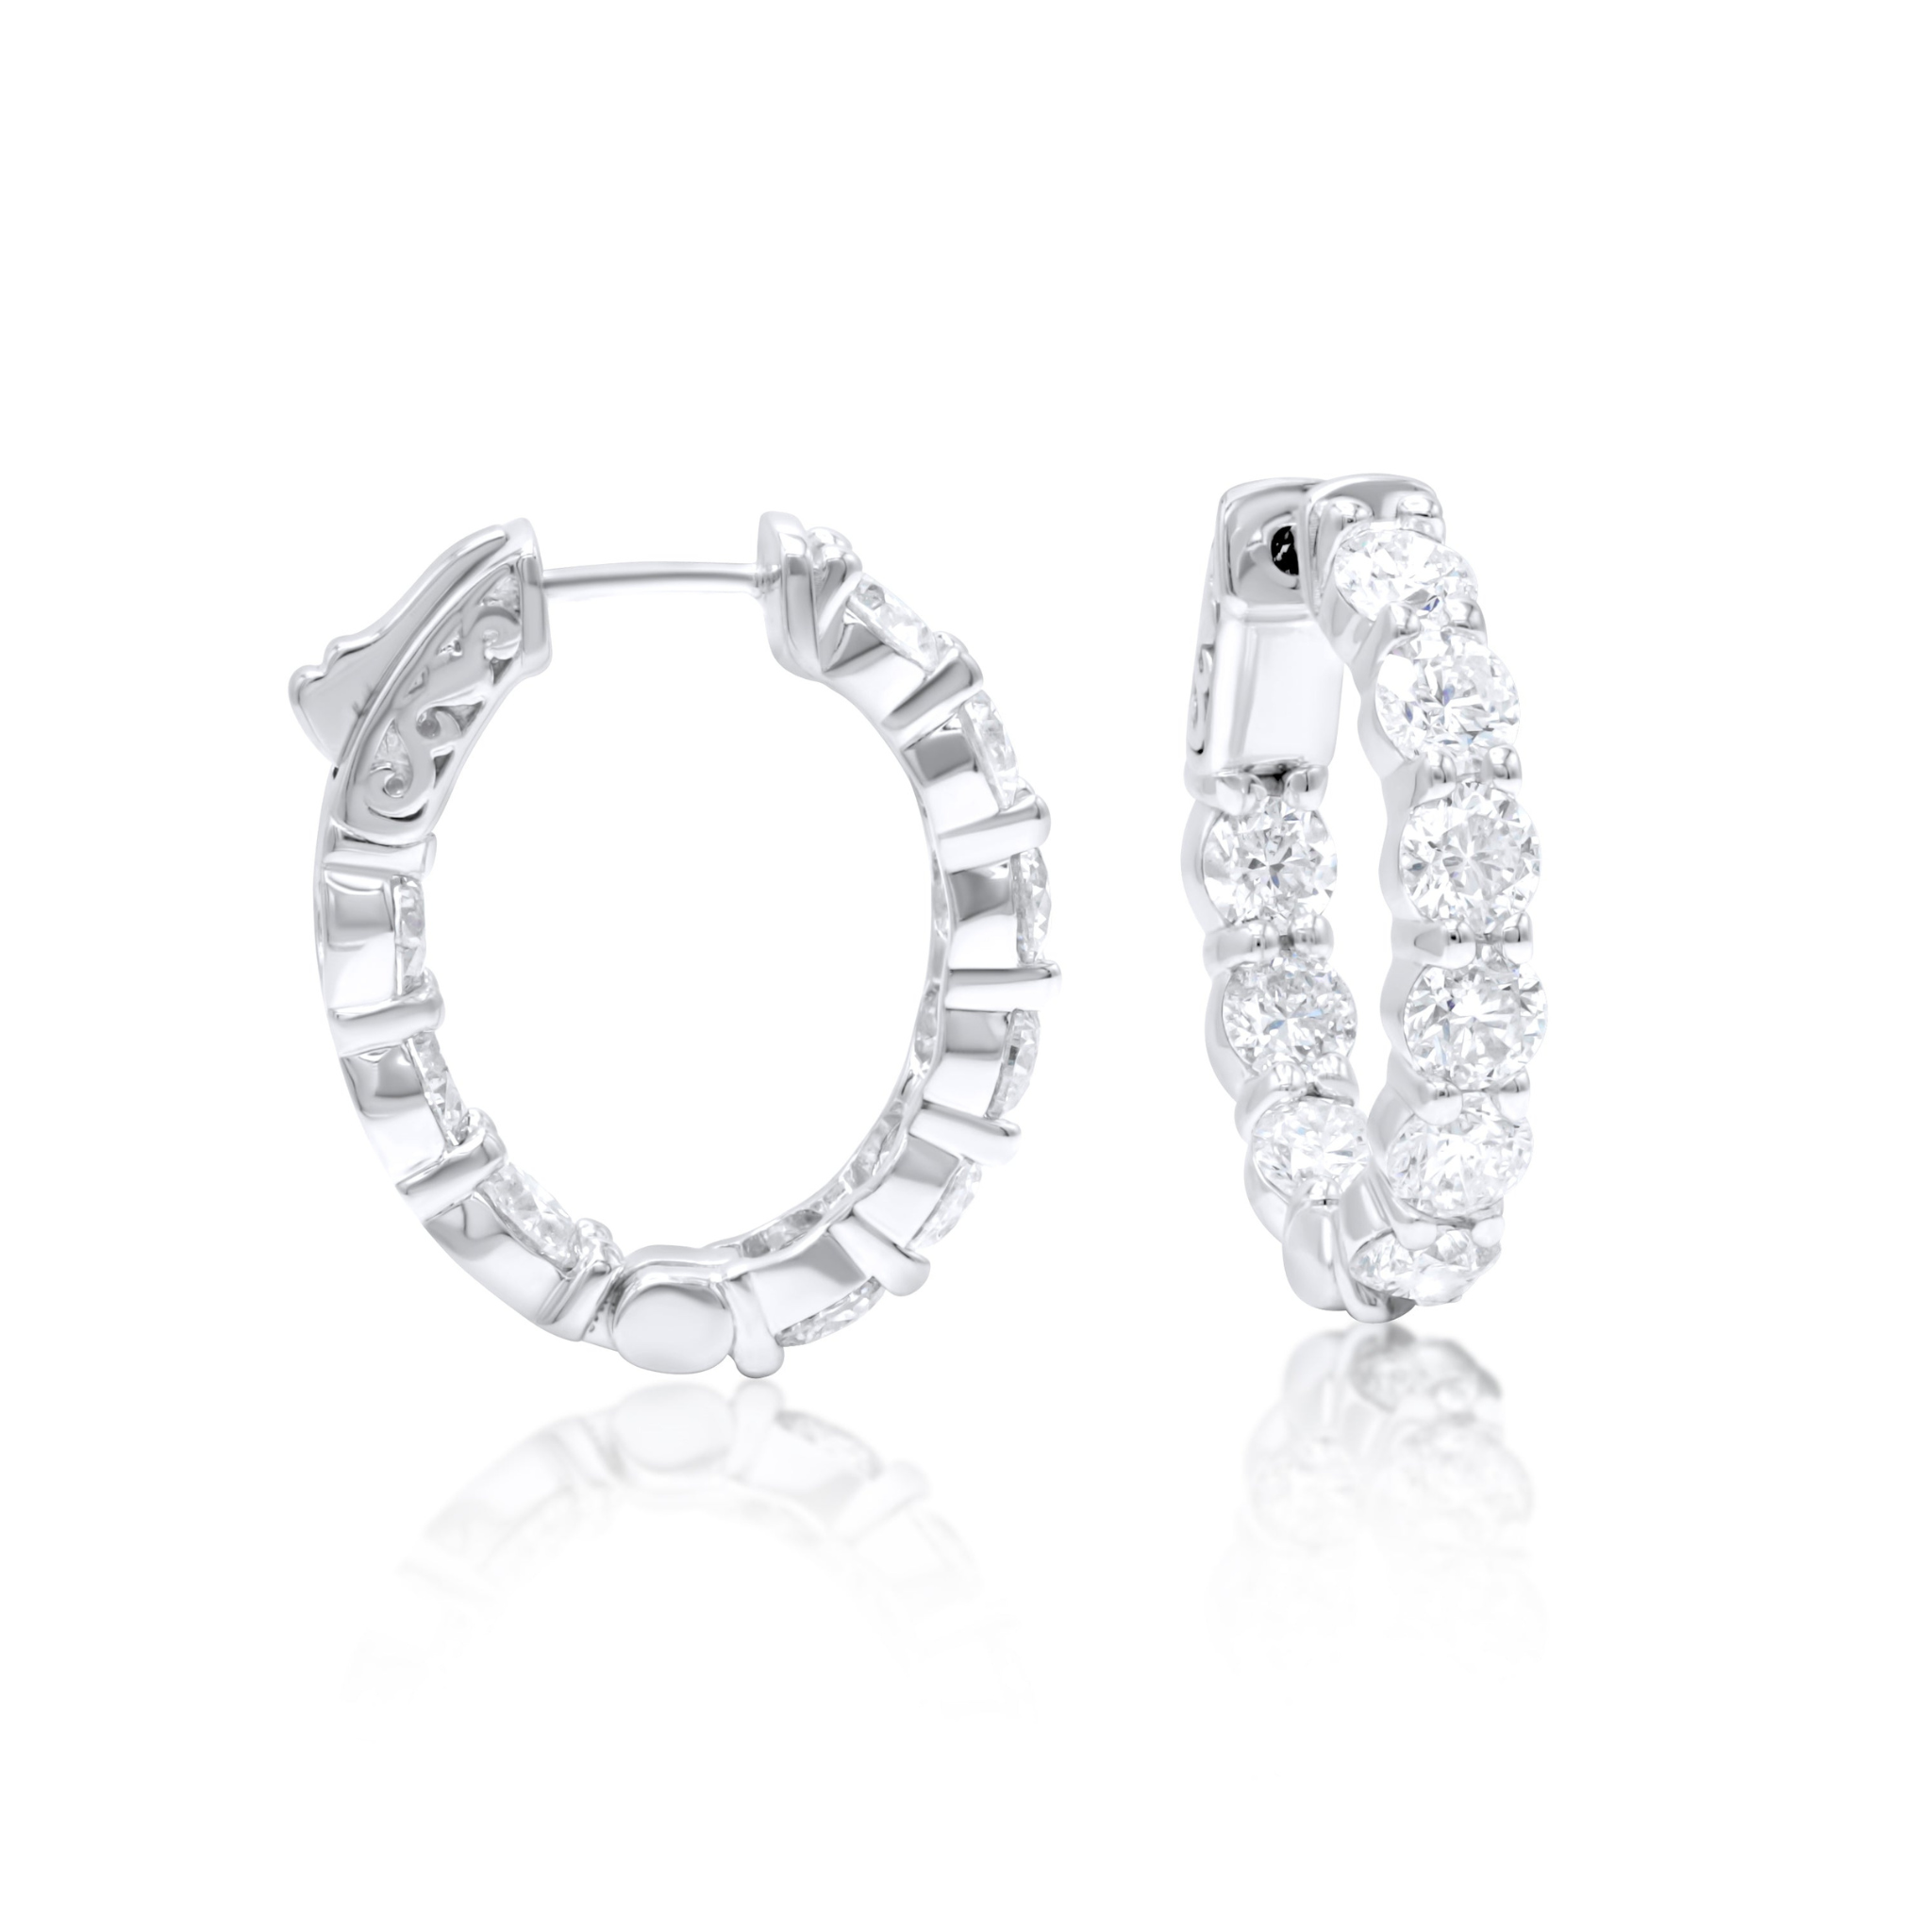 18 Kt White Gold 0.75" Hoop Earrings with 4.55 cts.jpg